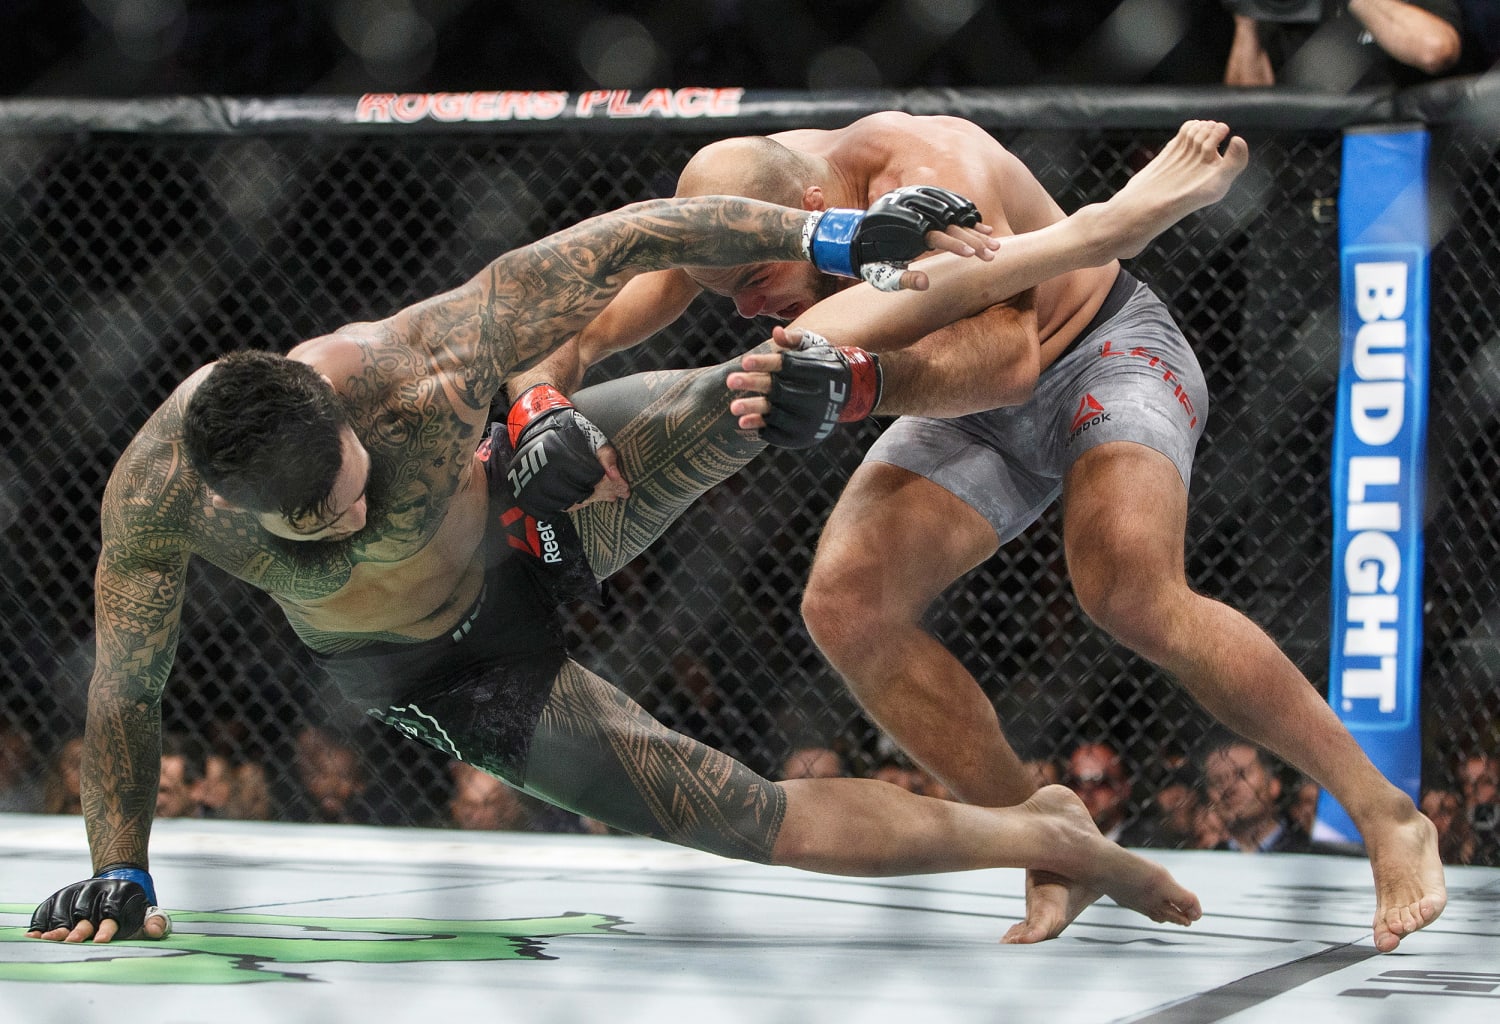 Clovis native Raul Rojas Jr. becomes youngest fighter to win UFC fight